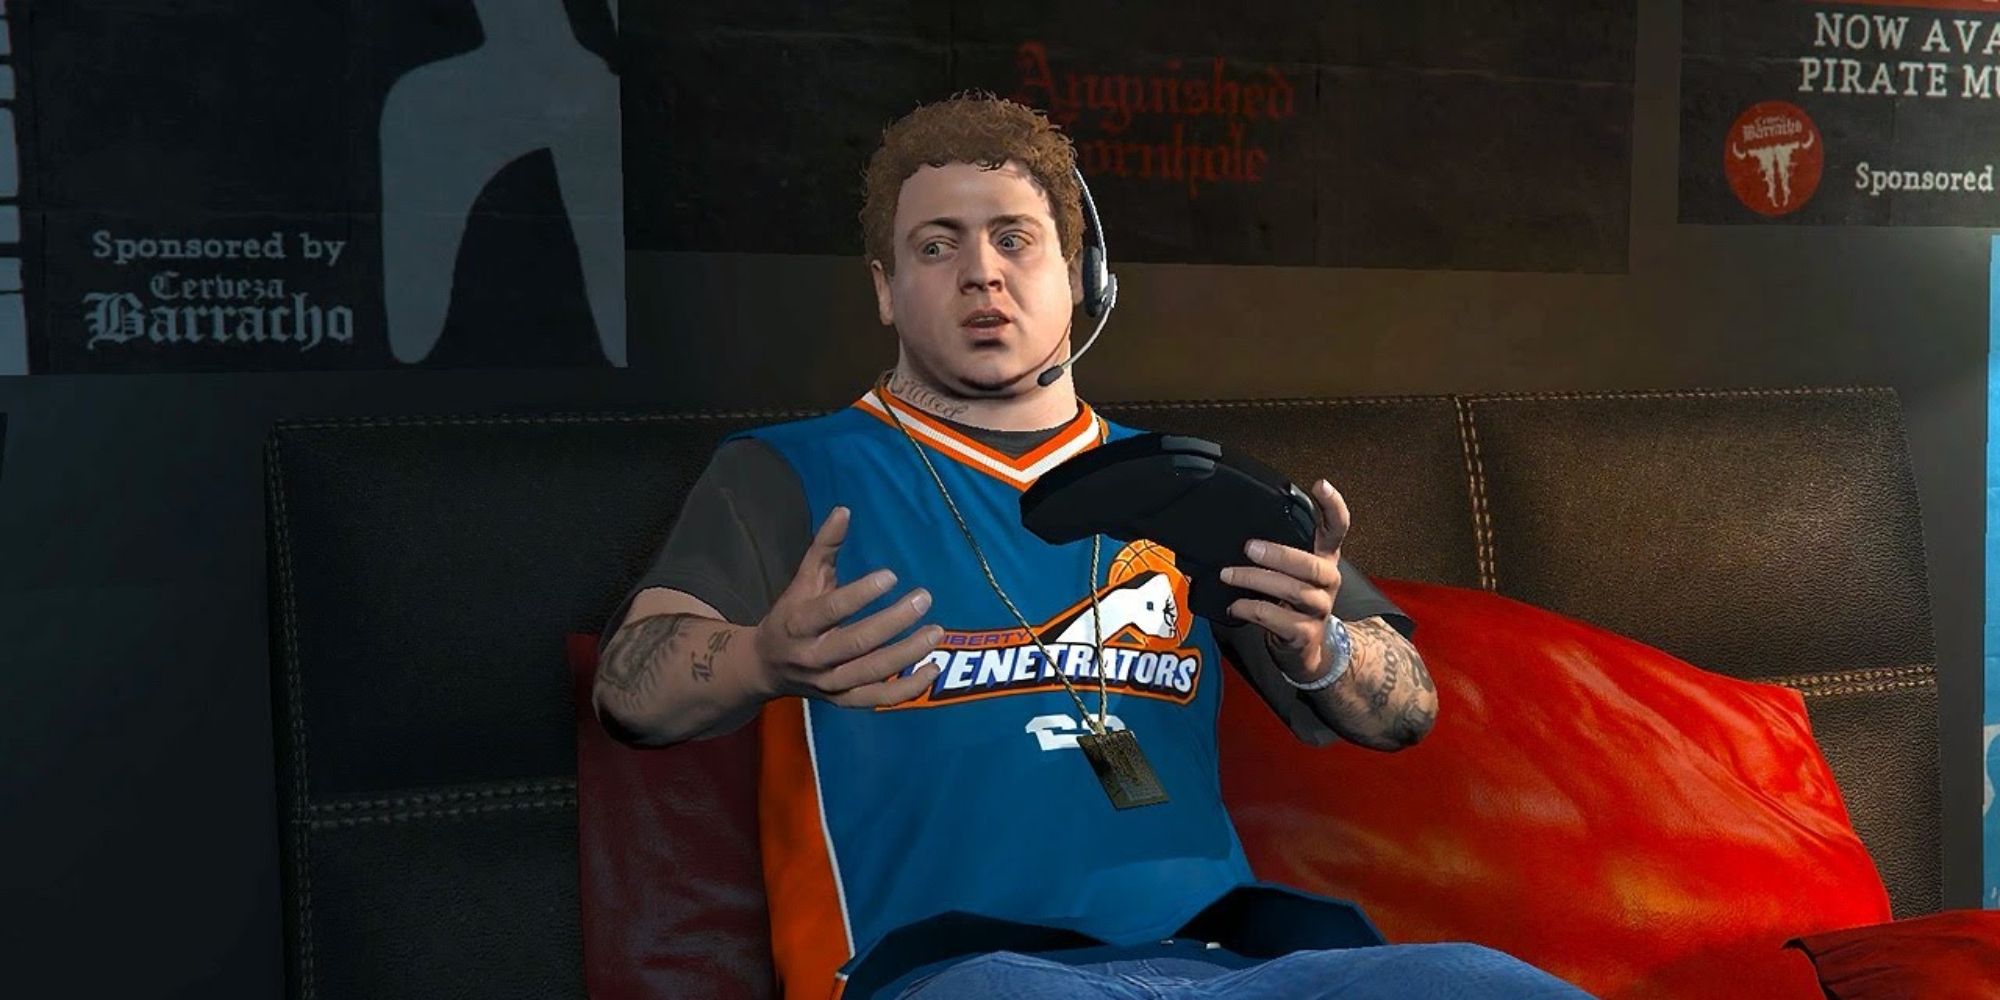 Grand Theft Auto 5 Screenshot Of Jimmy De Santa On Bed Playing Video Game